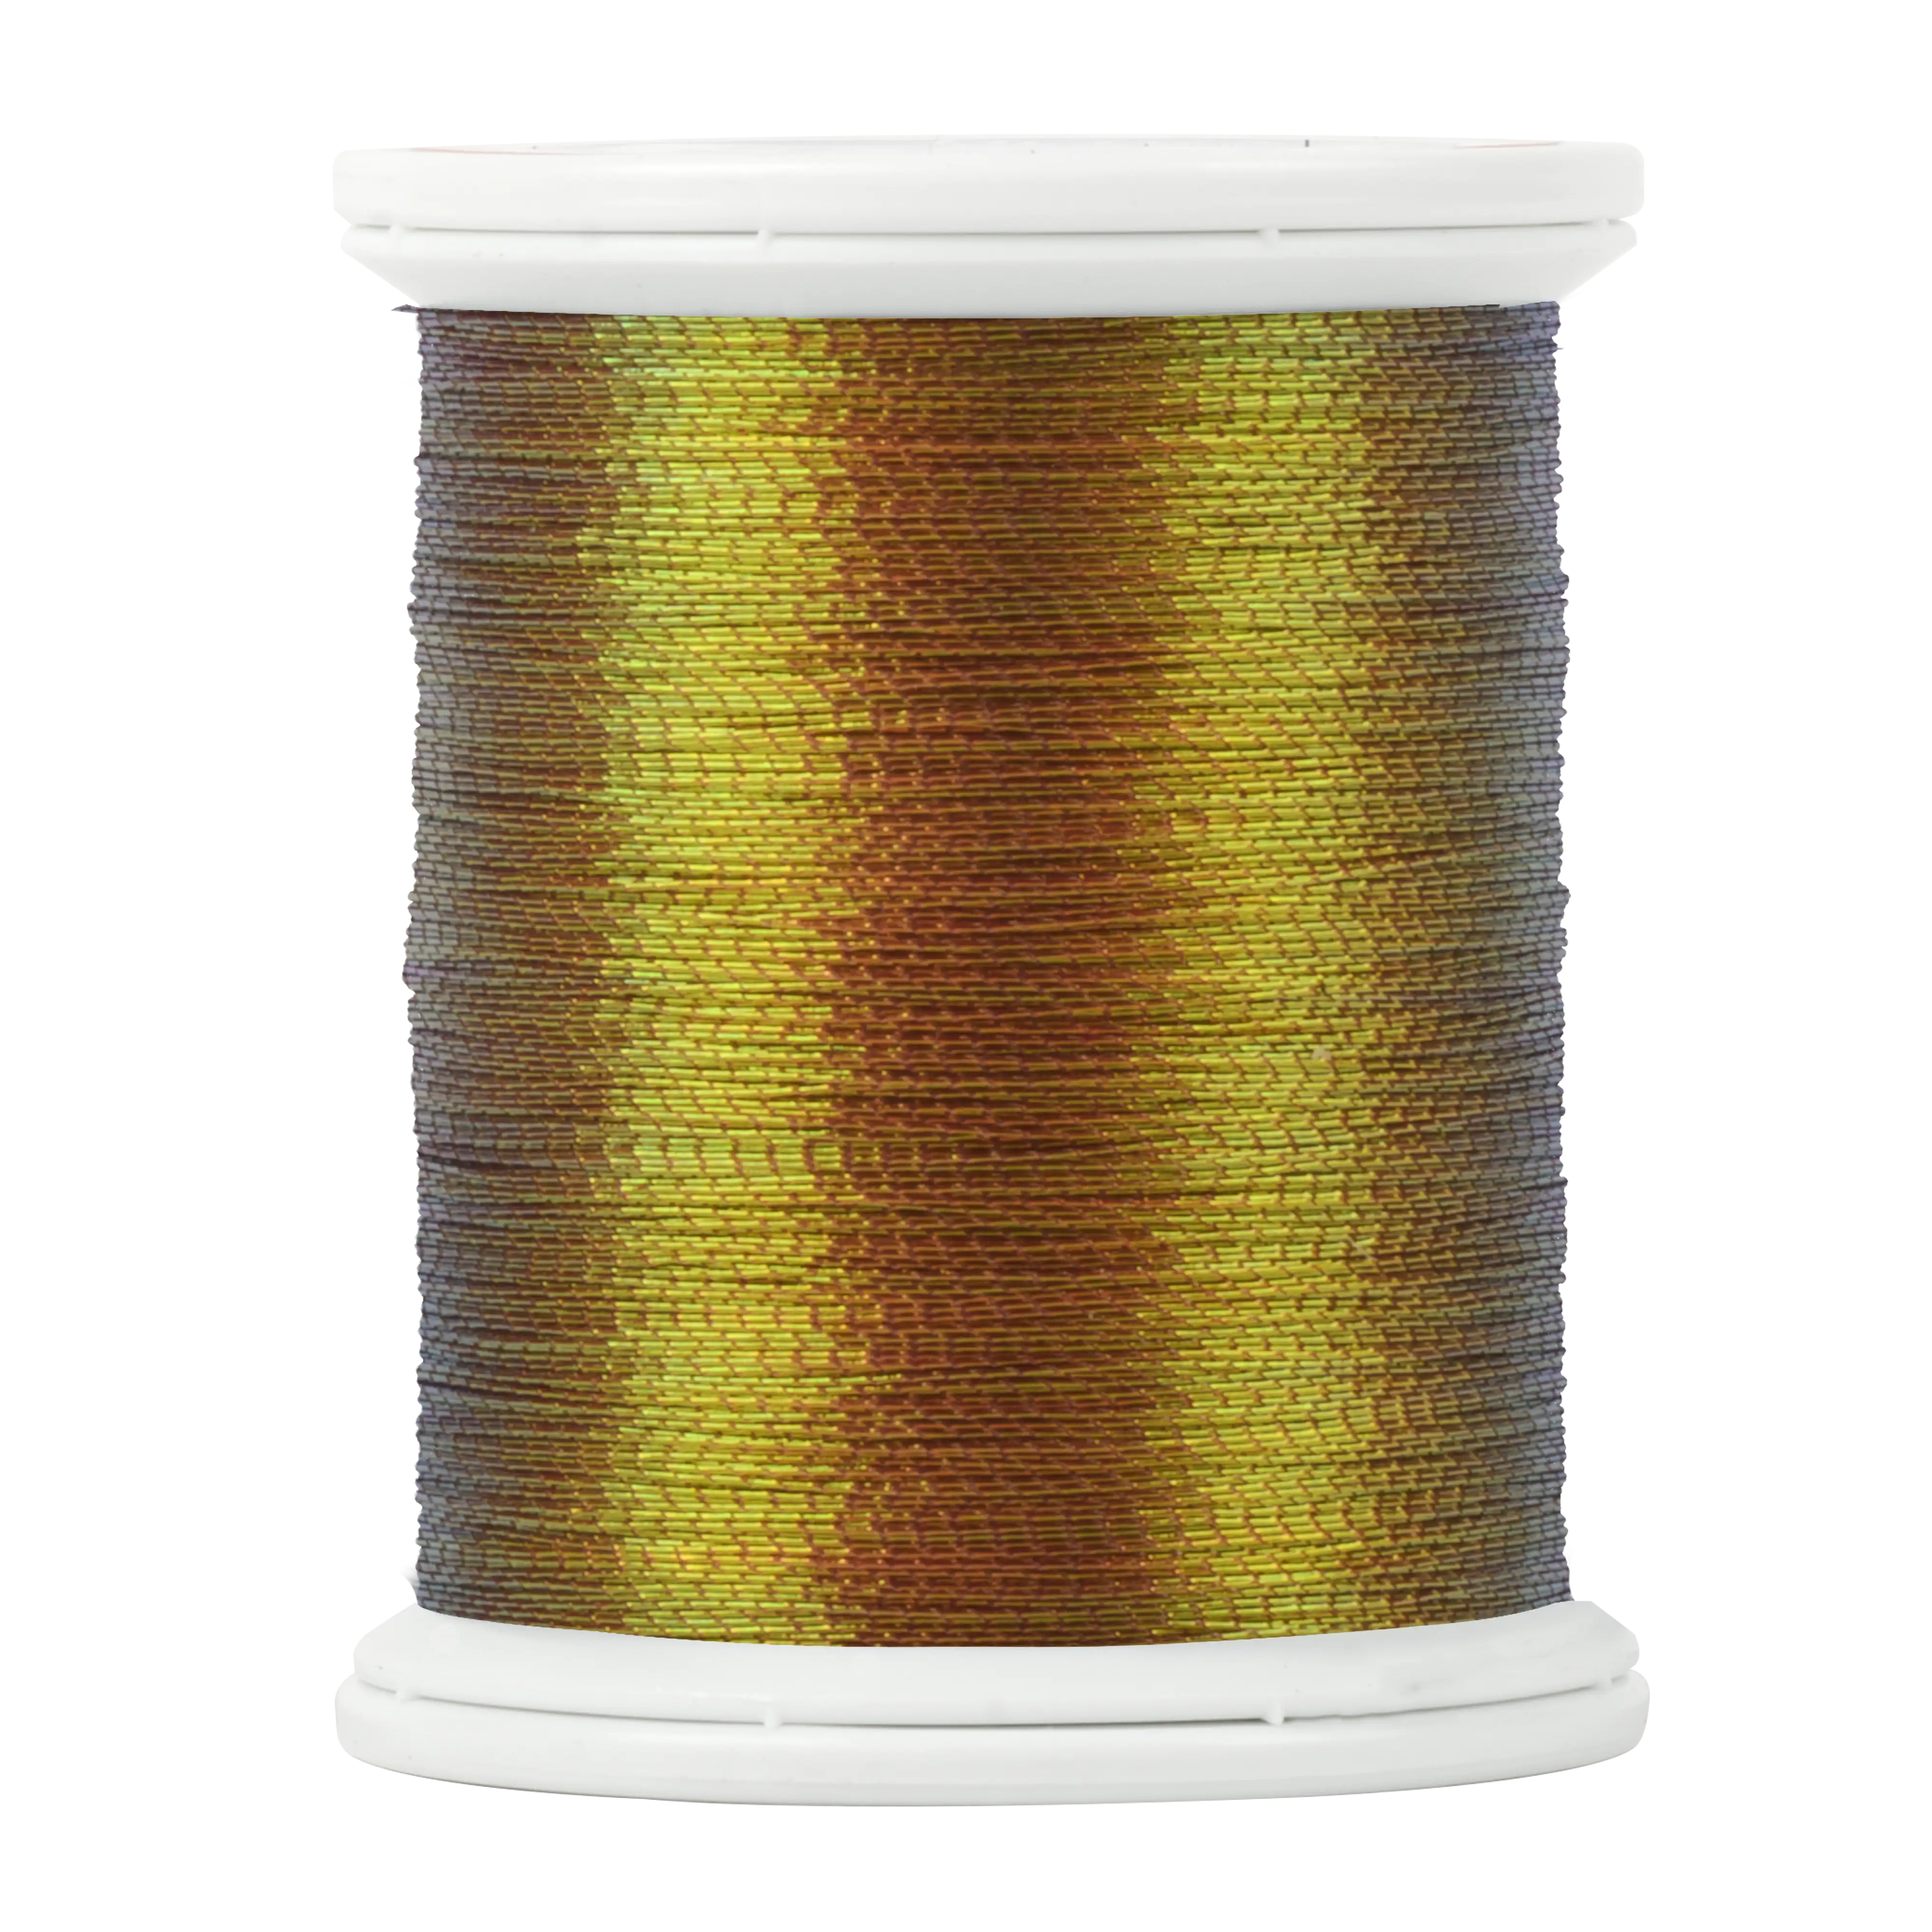 Metallic Thread for Rod Building - Free Shipping